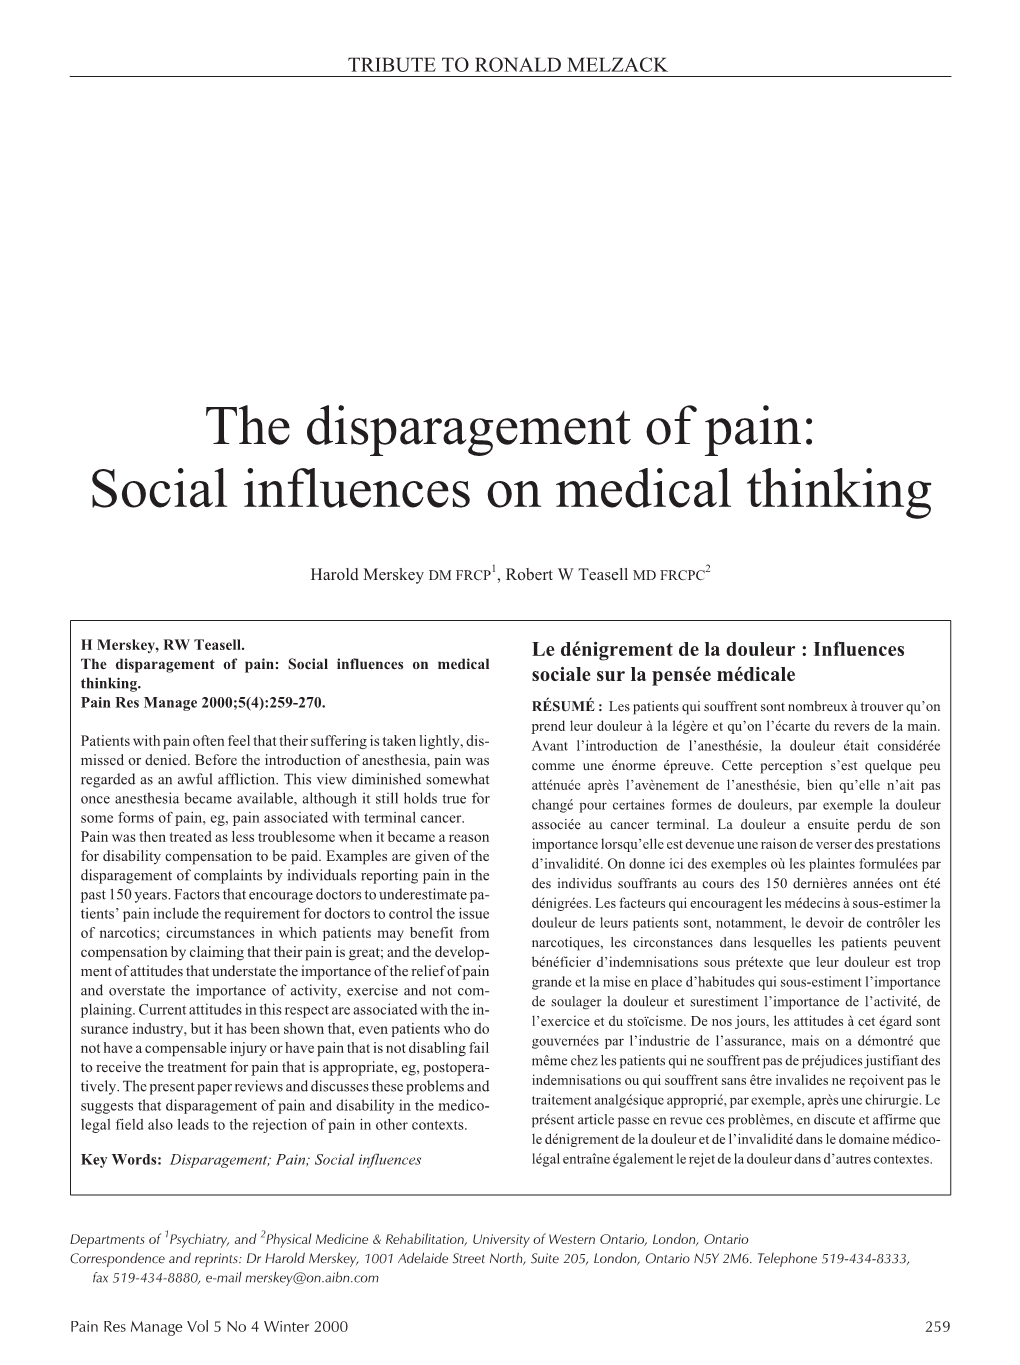 The Disparagement of Pain: Social Influences on Medical Thinking